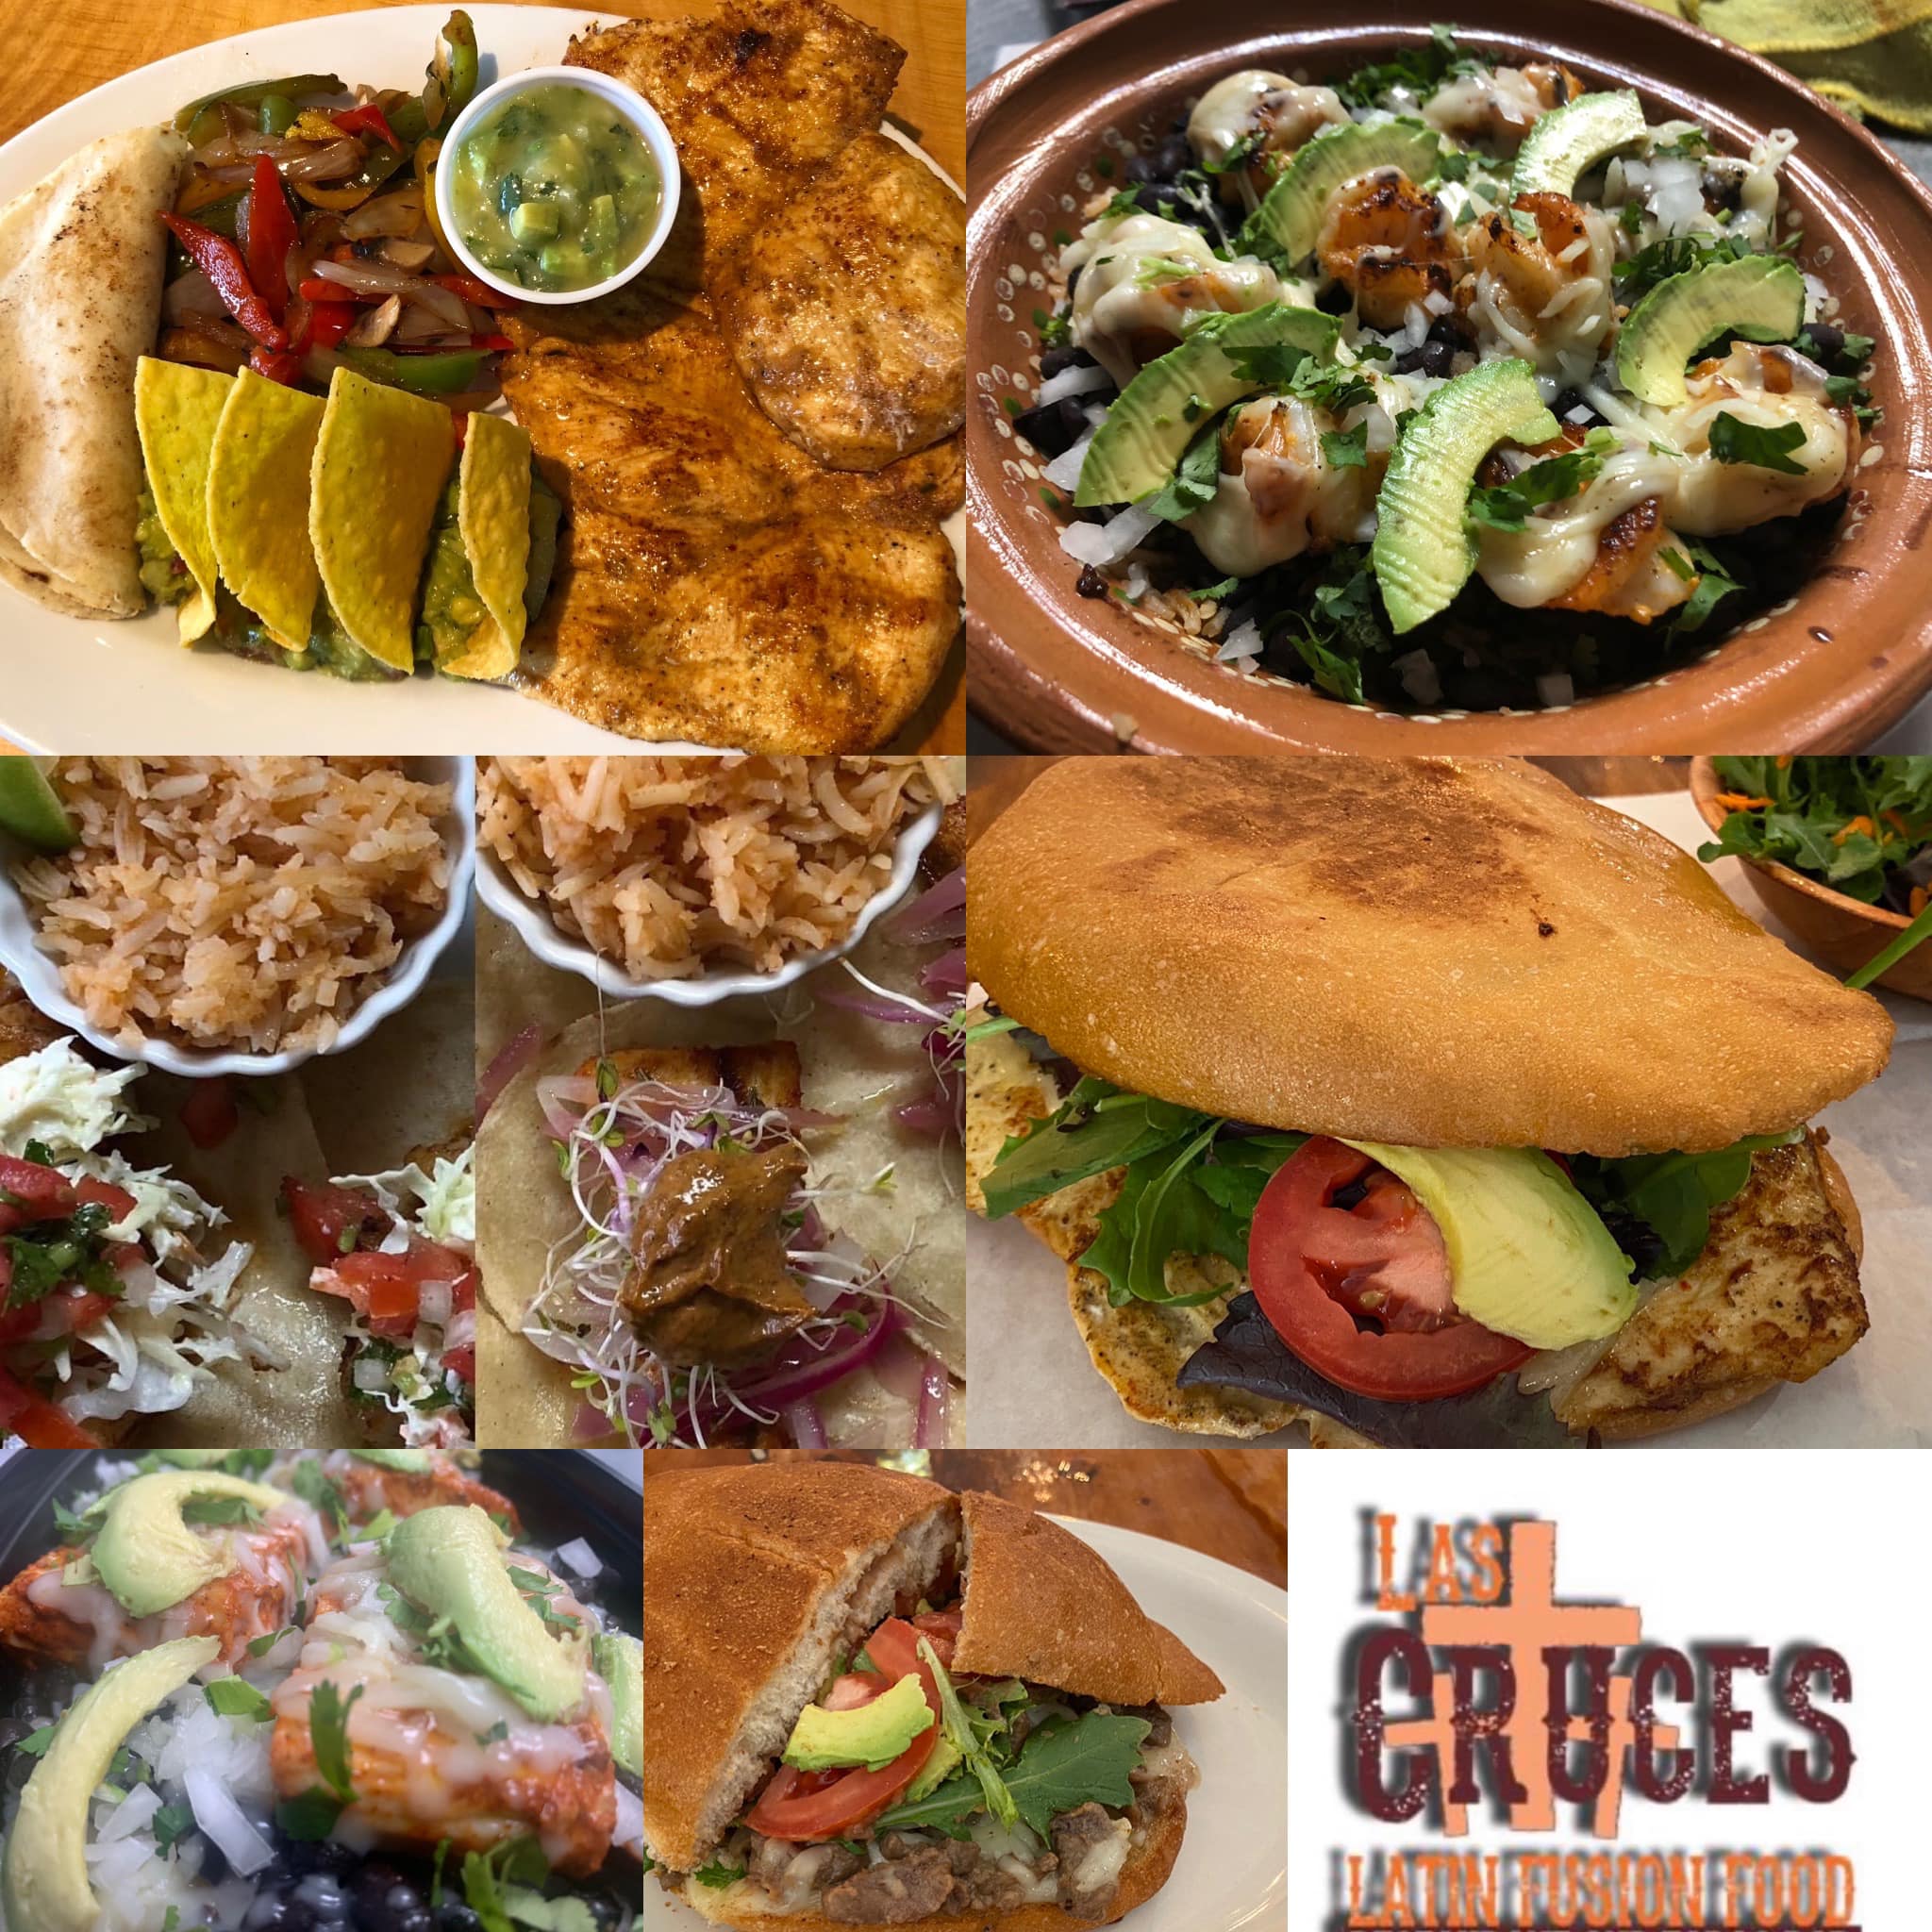 LAS CRUCES NC FOOD TRUCKS AND CATERING